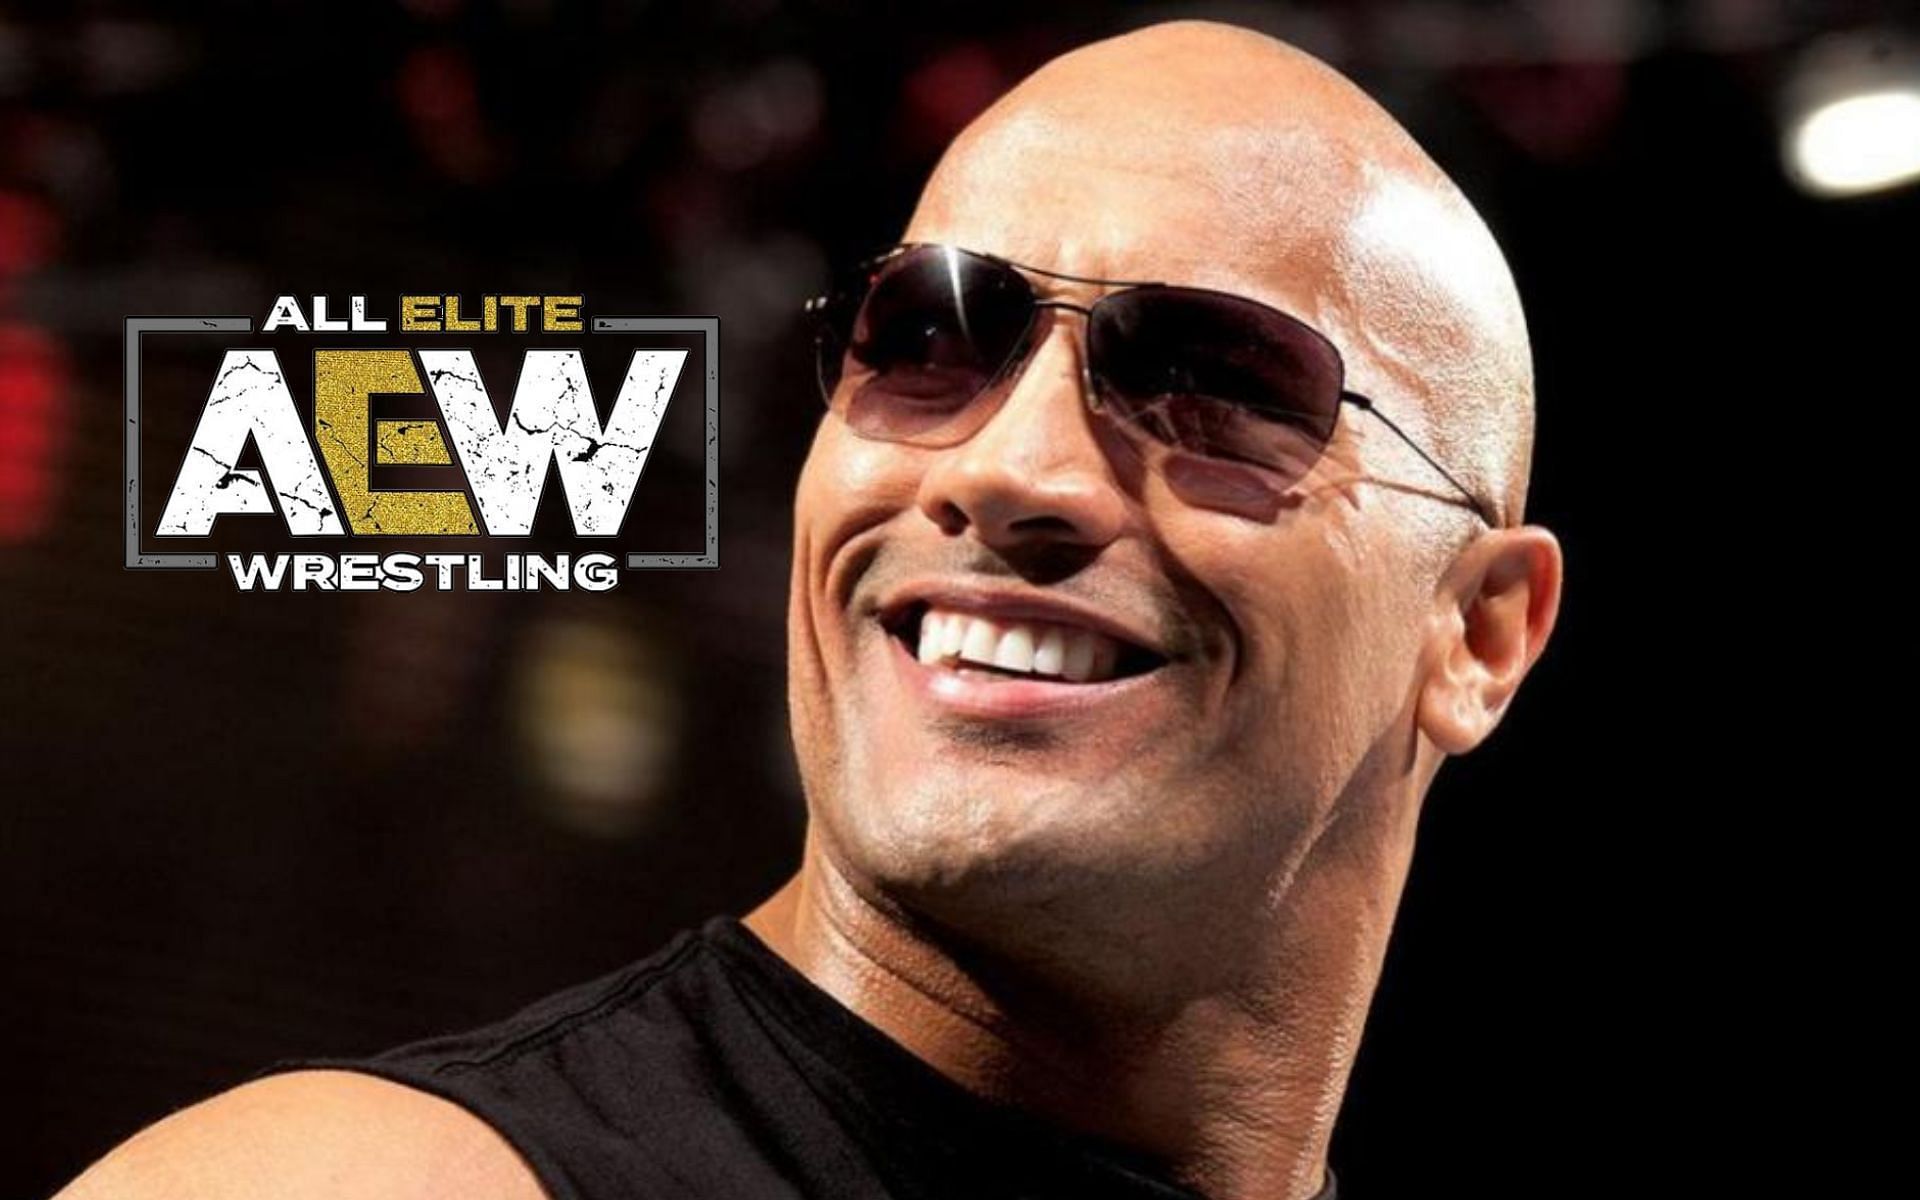 WWE legend The Rock was included in this AEW star